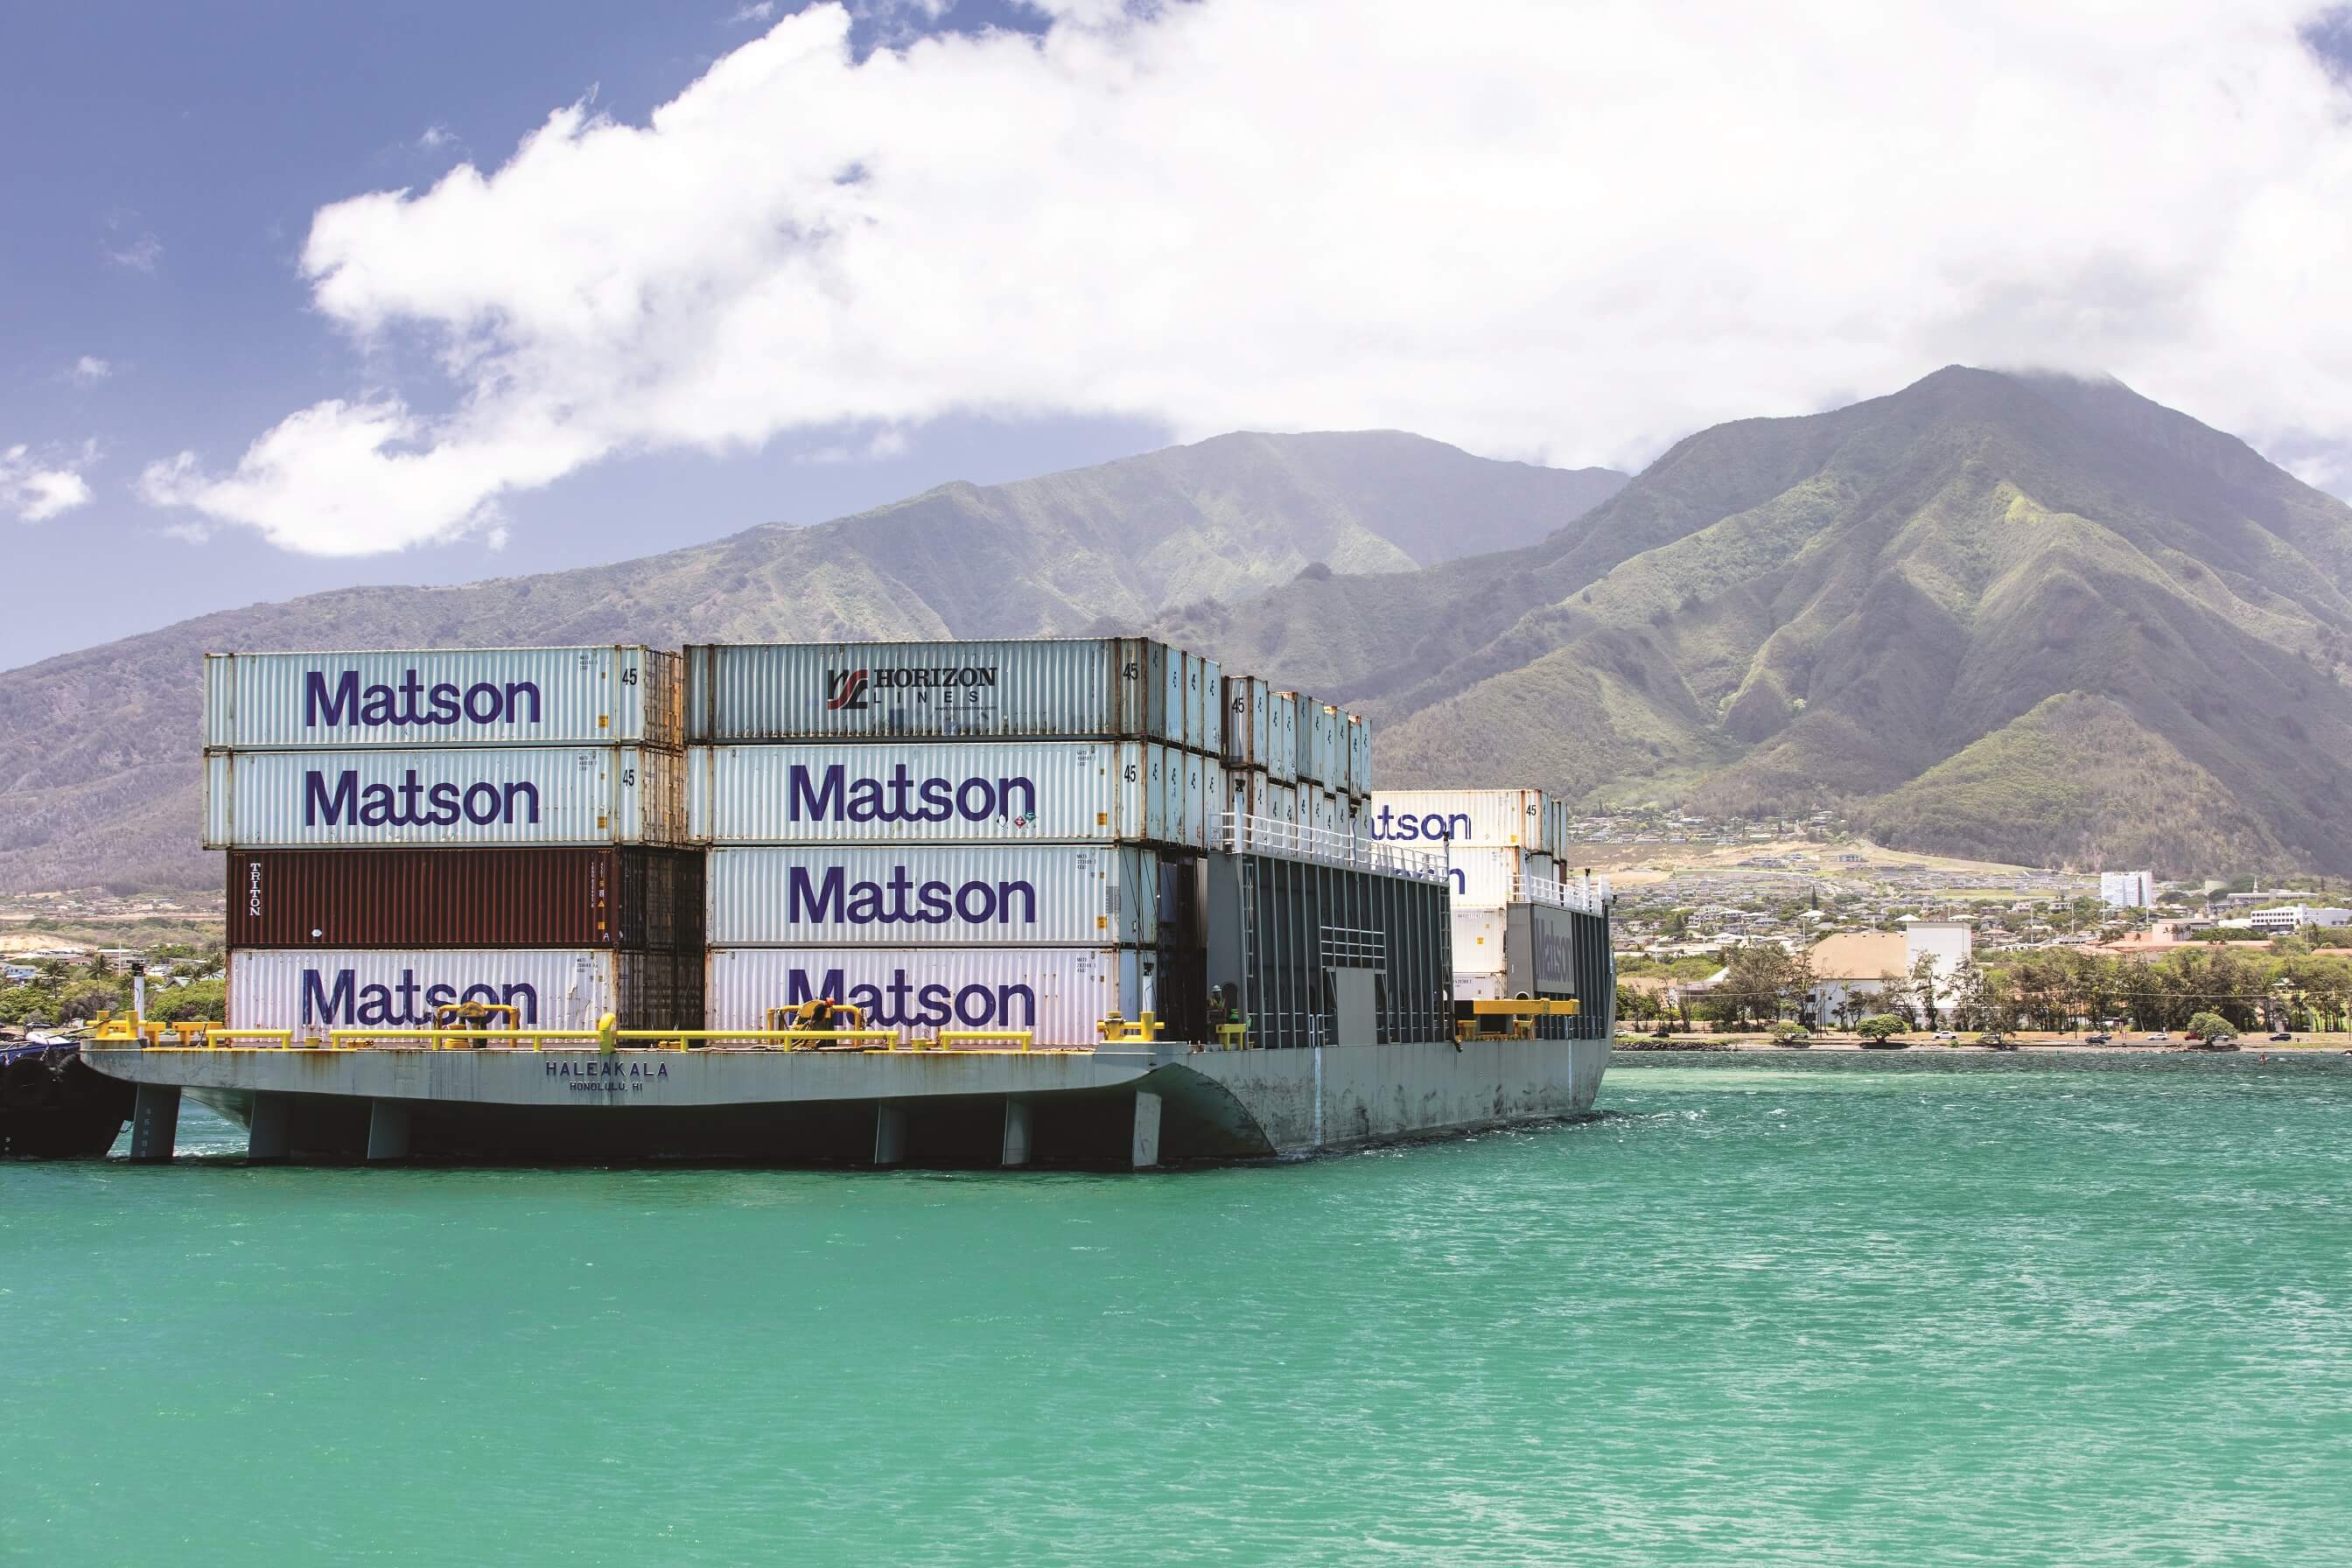 Matson barge Haleakala loaded with Matson containers arrives in Kahului with green mountains and clouds in the background.